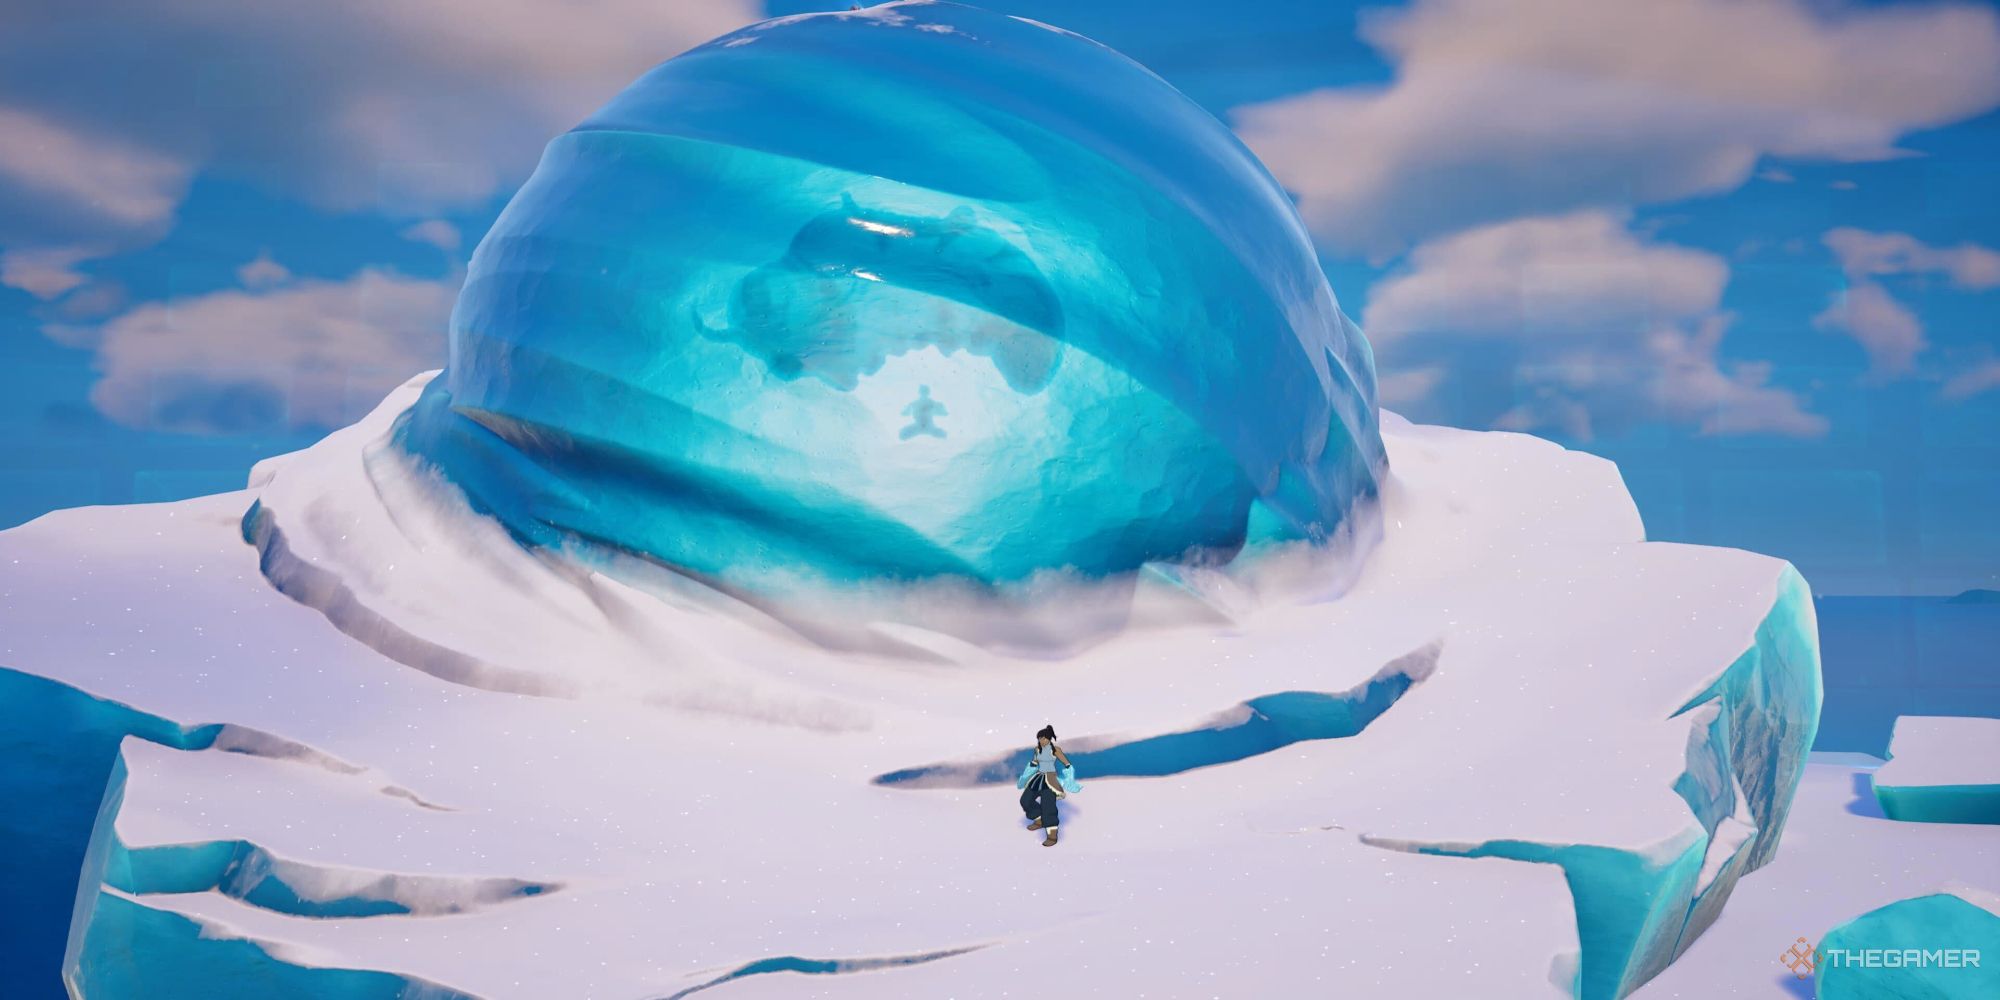 A screenshot from Fortnite Chapter Five, Season Two, shwoing Korra with Ice Fan pickaxes standing in front of the large iceberg with Aang and Appa inside.